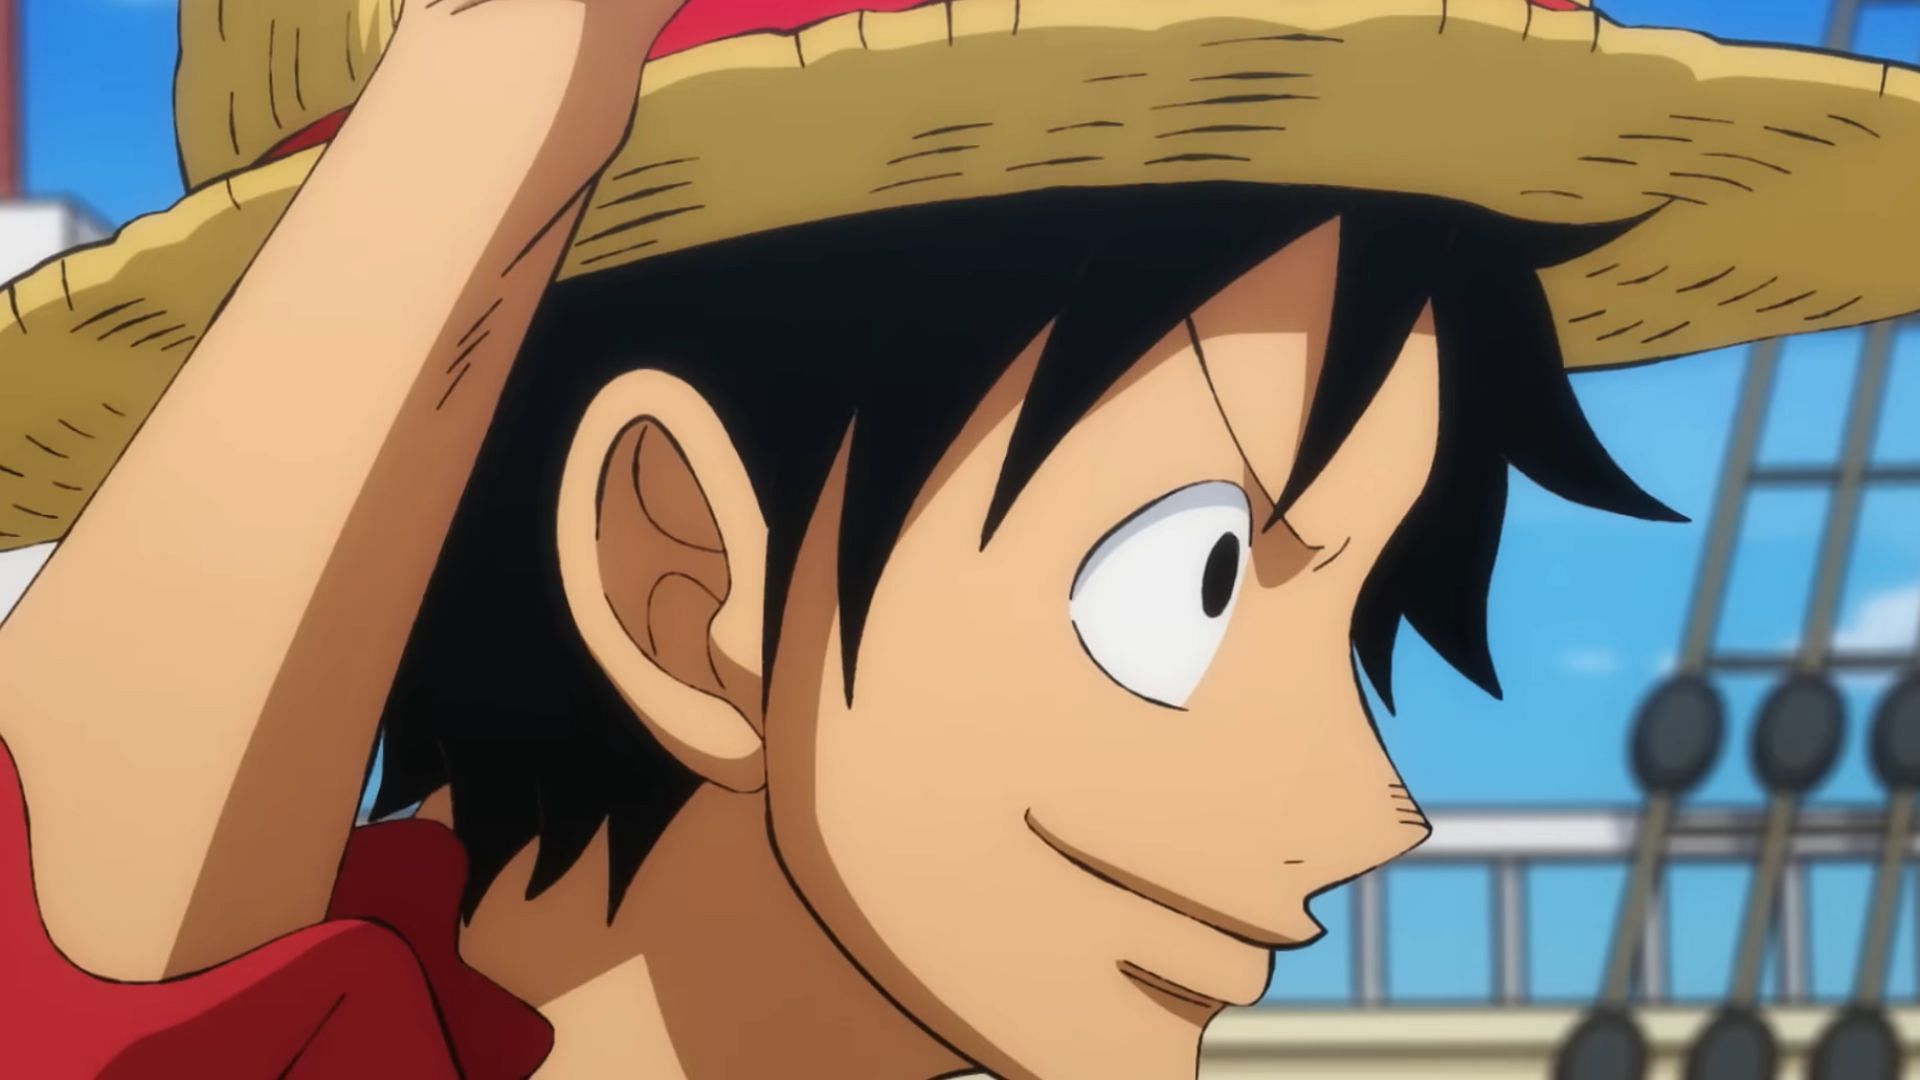 Monkey D. Luffy as seen in the anime (Image via Toei Animation)